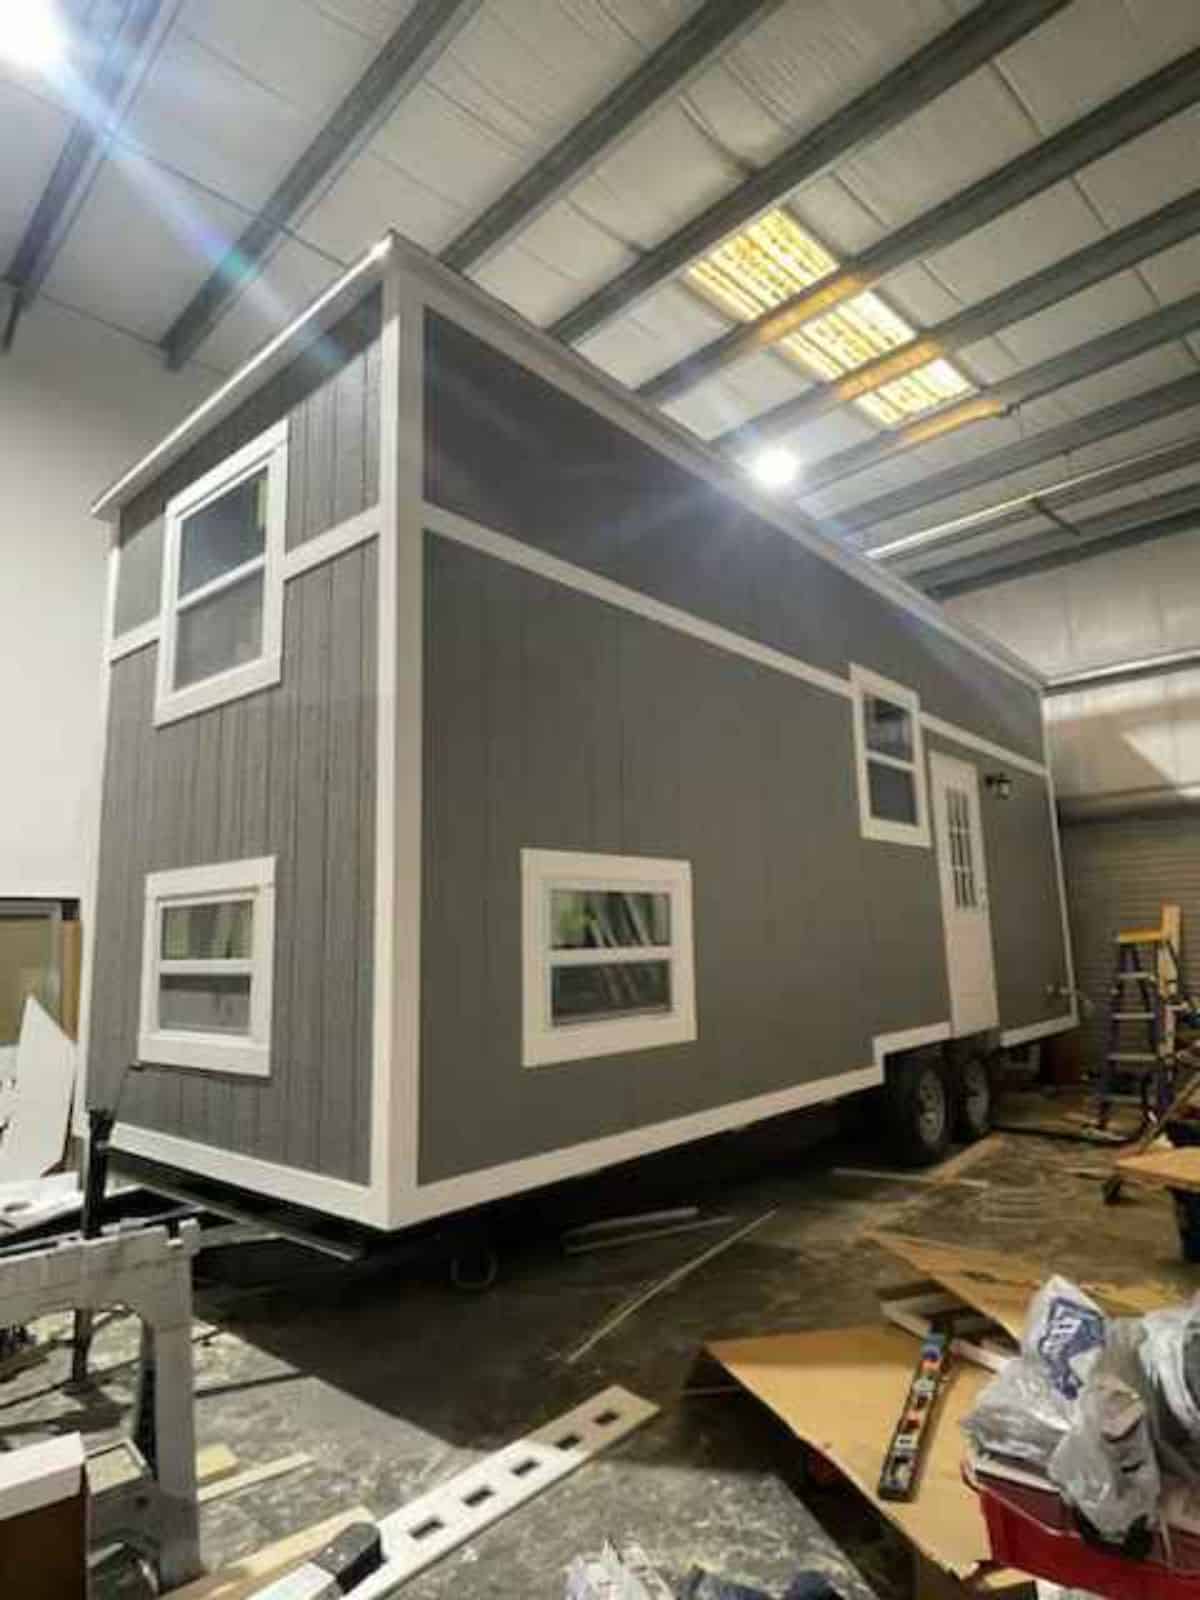 Gray and white colored exterior of 1 Bed Tiny Home